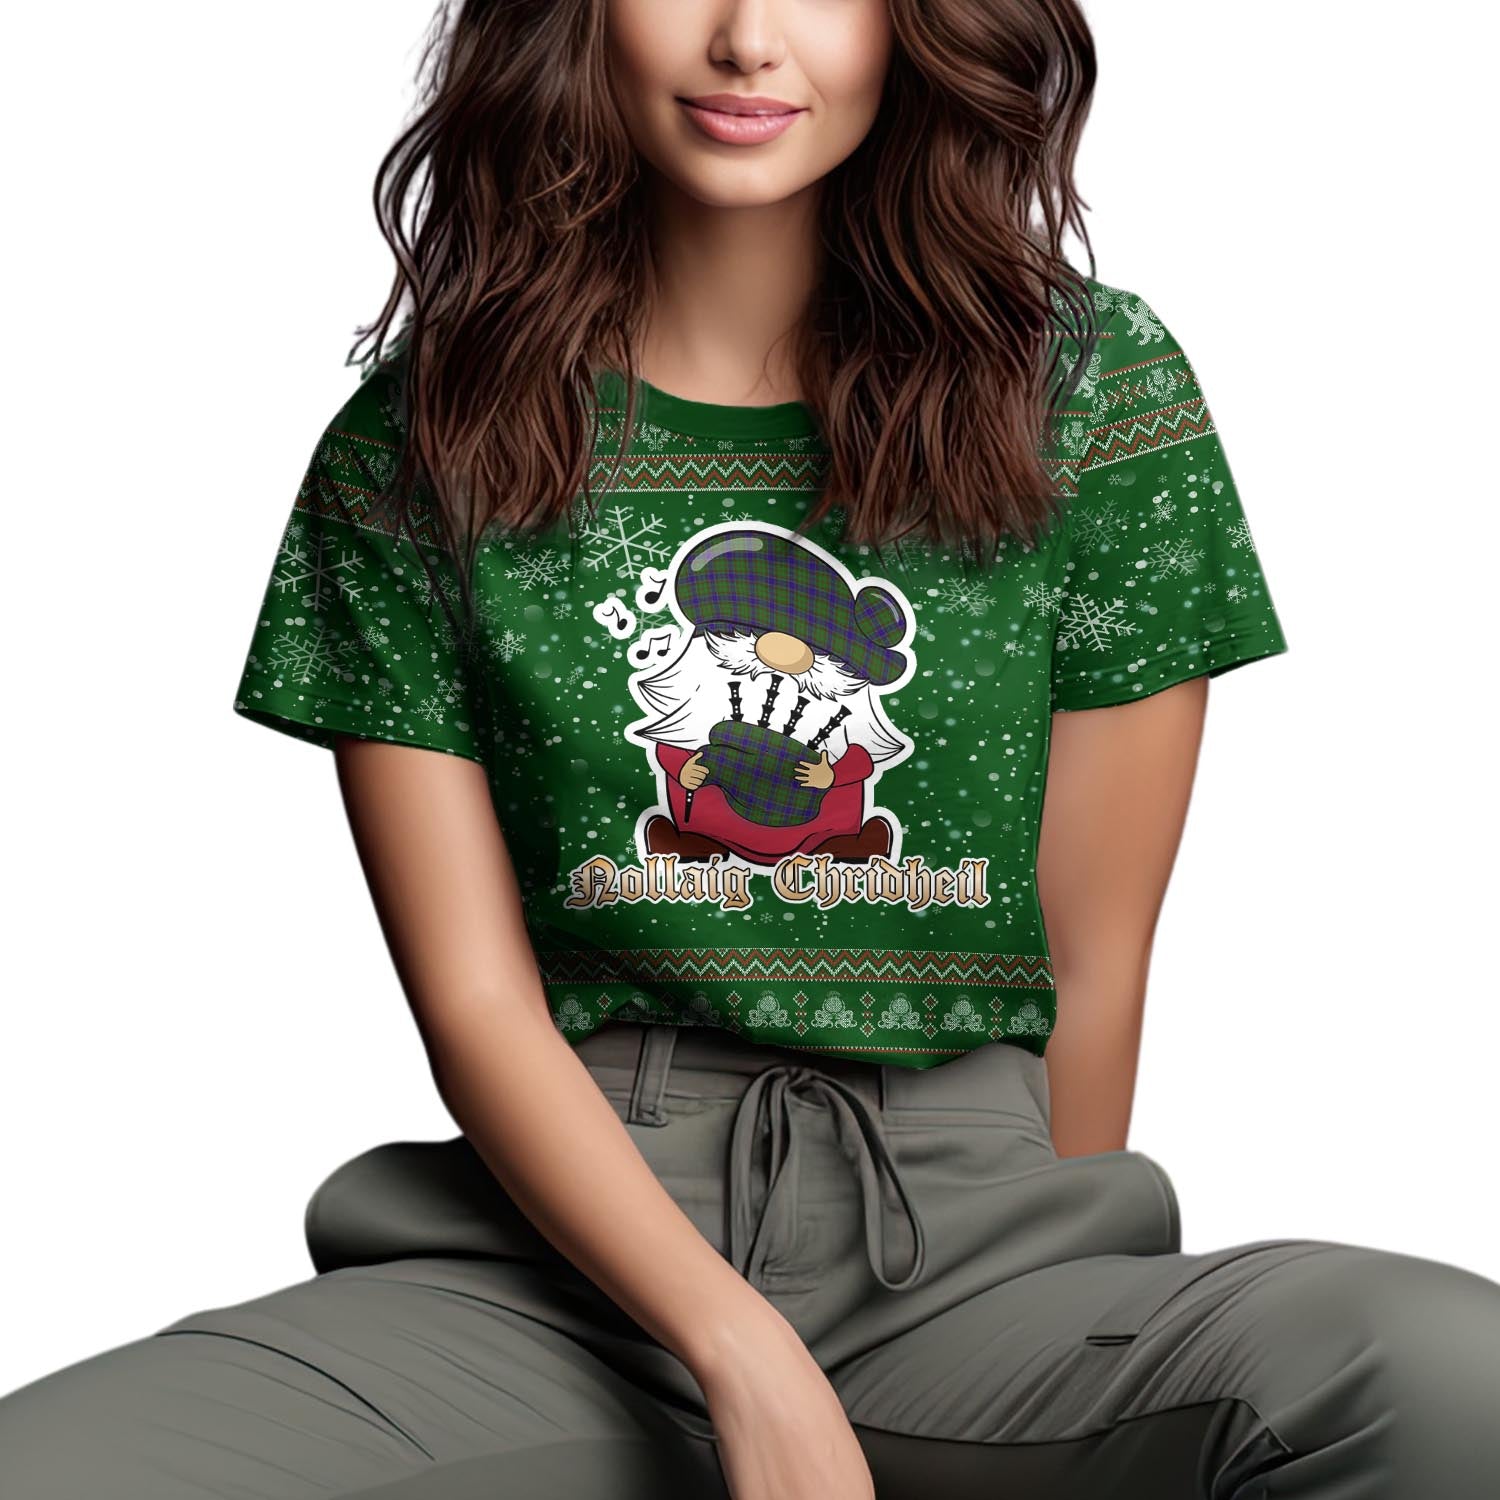 Adam Clan Christmas Family T-Shirt with Funny Gnome Playing Bagpipes Women's Shirt Green - Tartanvibesclothing